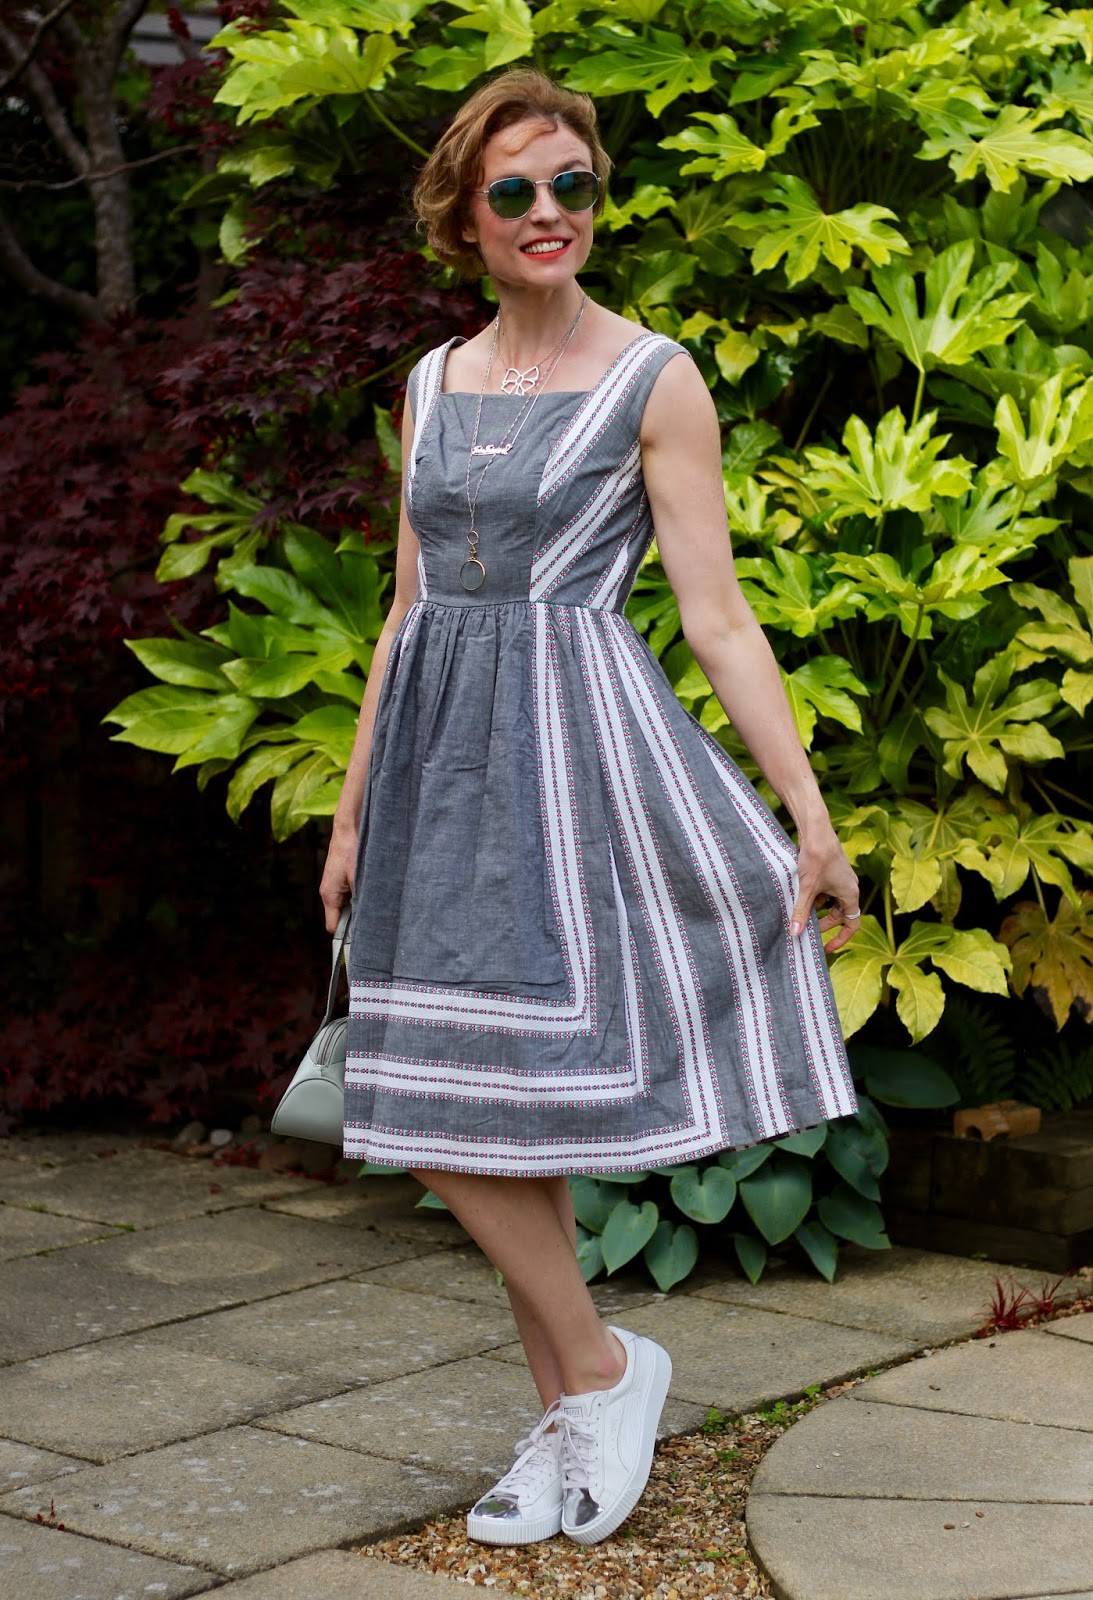 Vintage 1950s Summer Dress Outfit | Fake Fabulous